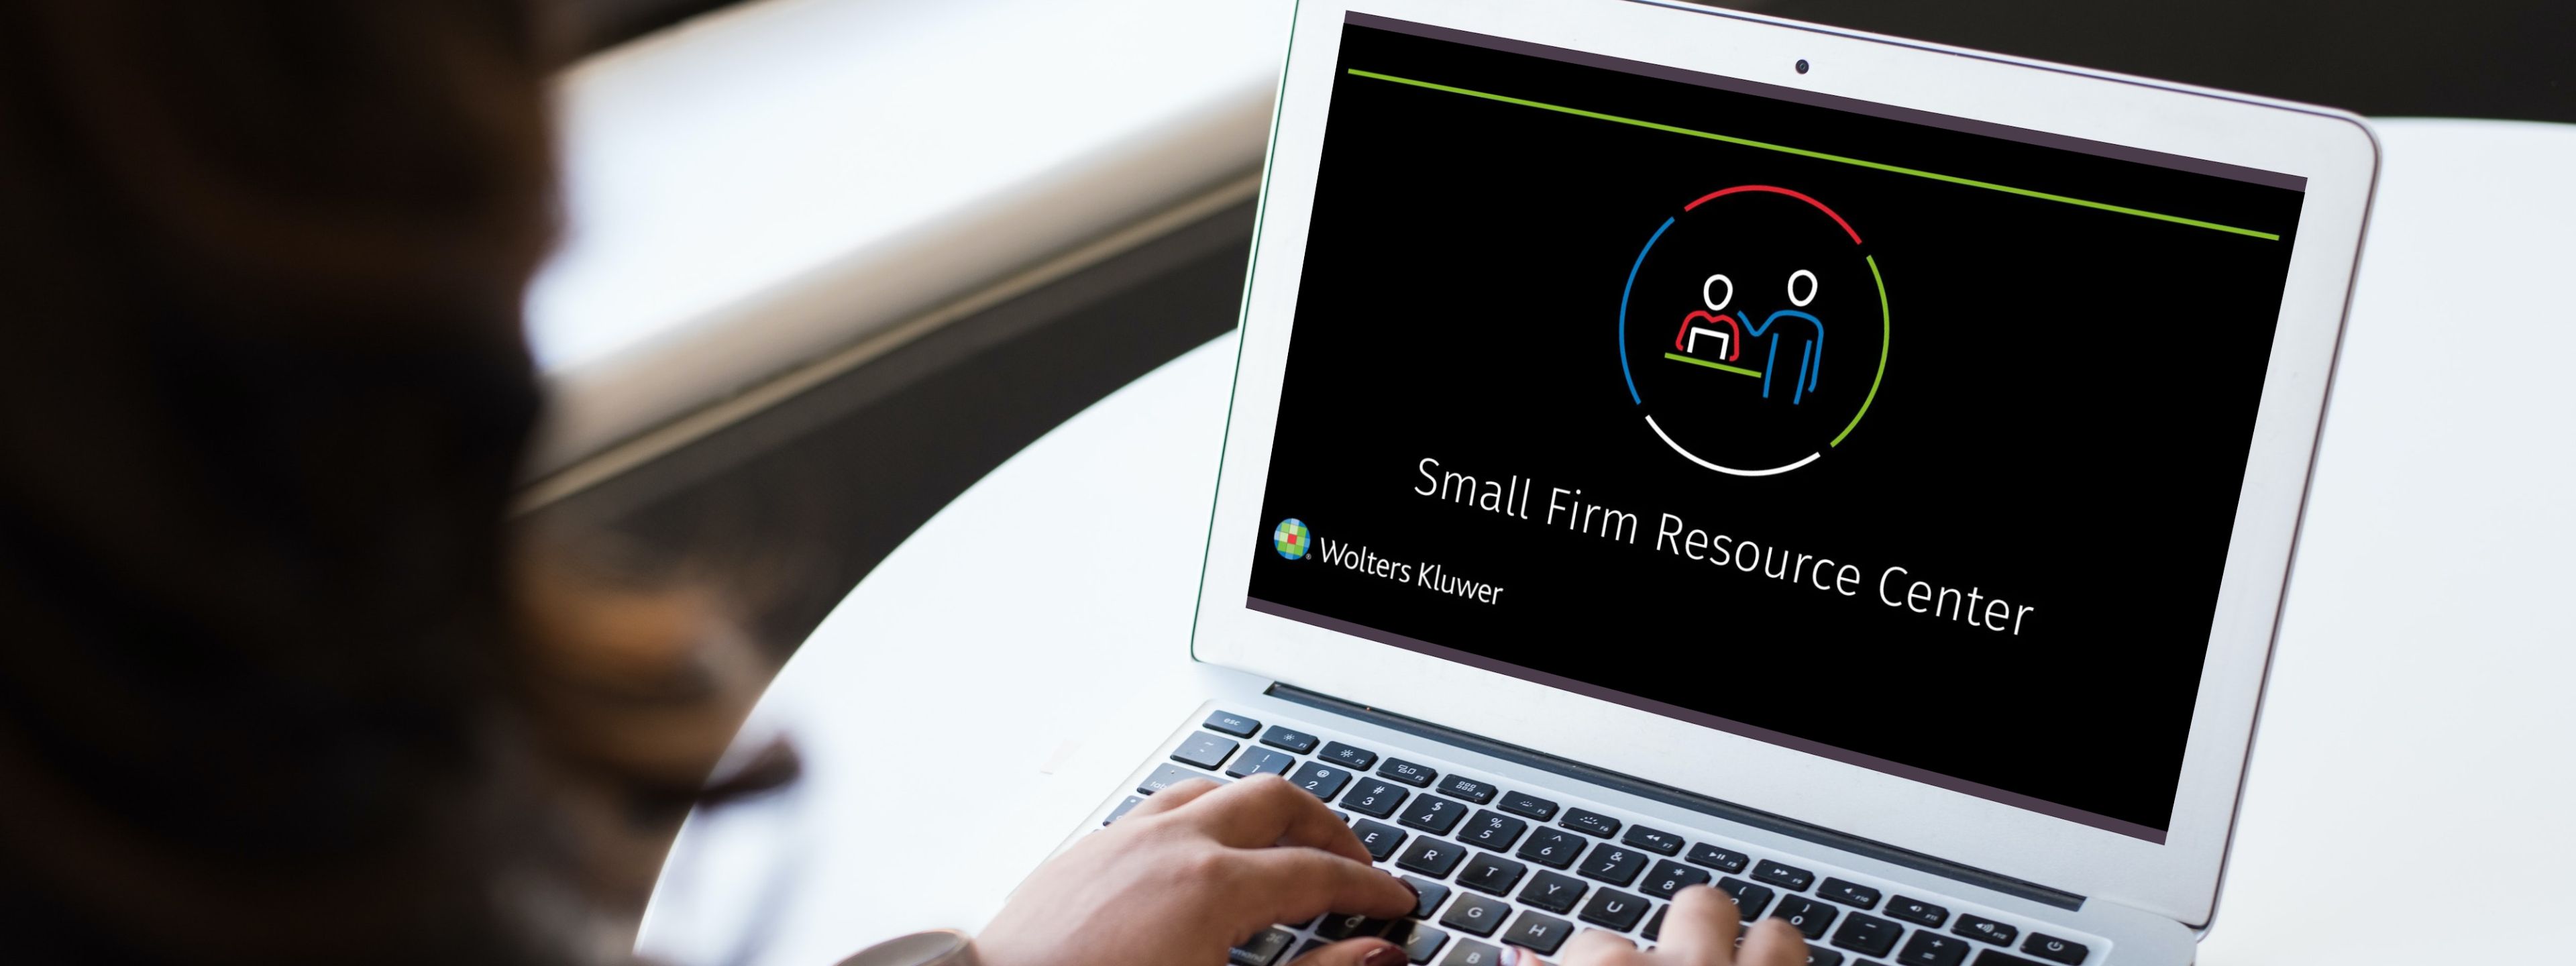 Small Firm Resource Center on Laptop